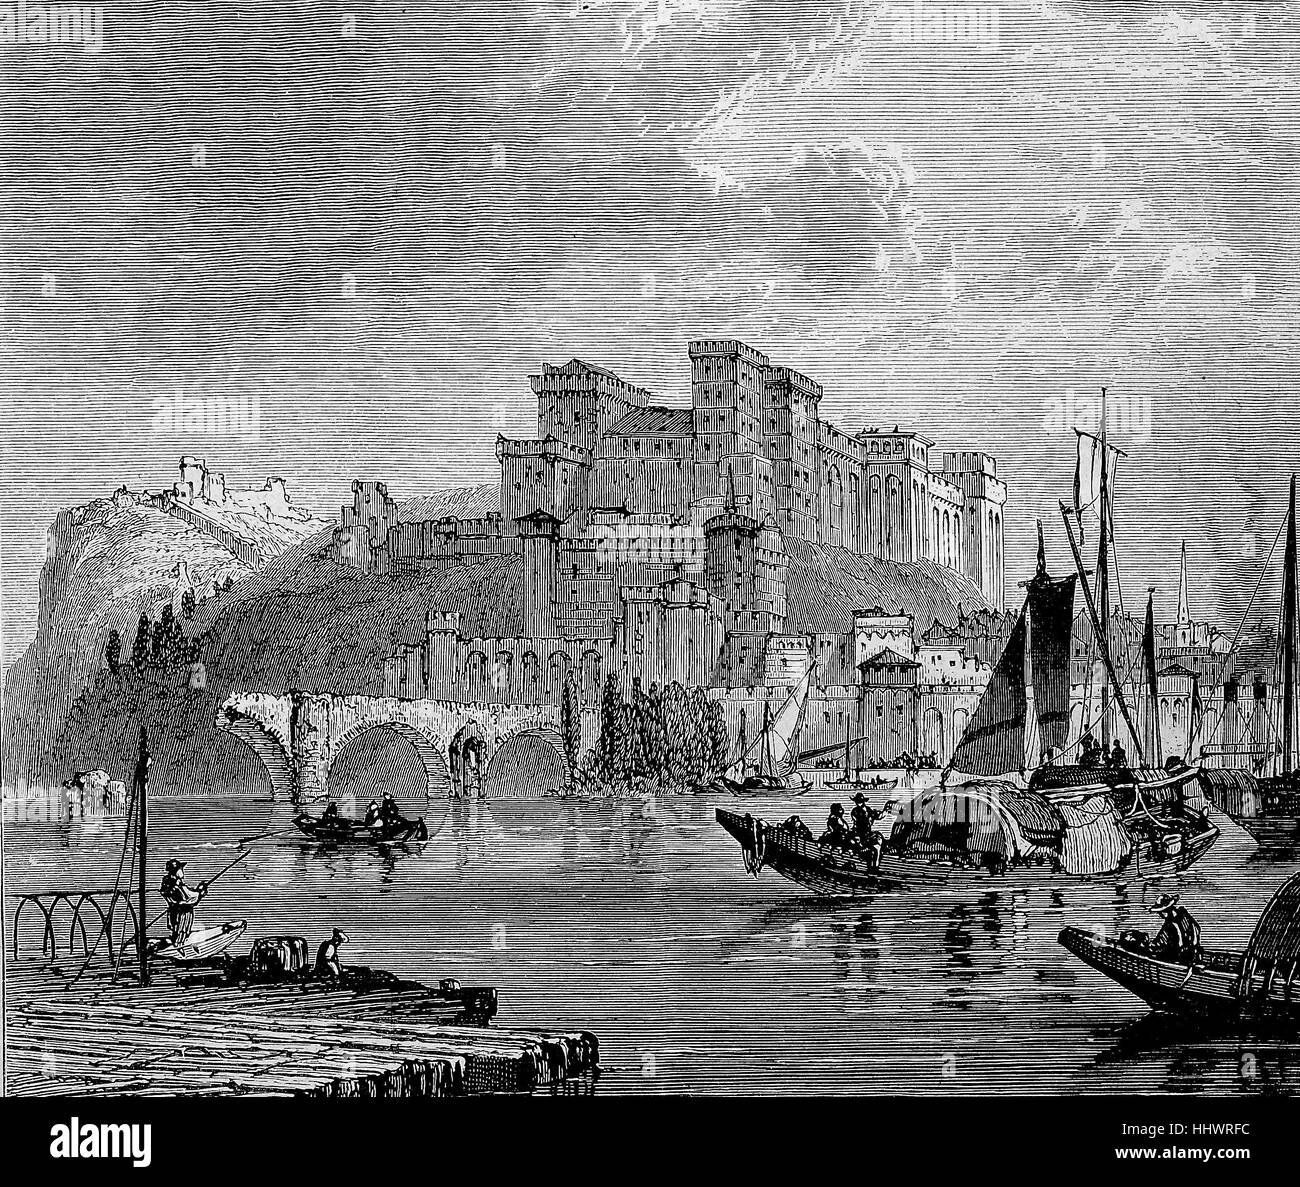 View of the city of Avignon on the Rhone river in Provence in southern France, historical image or illustration, published 1890, digital improved Stock Photo